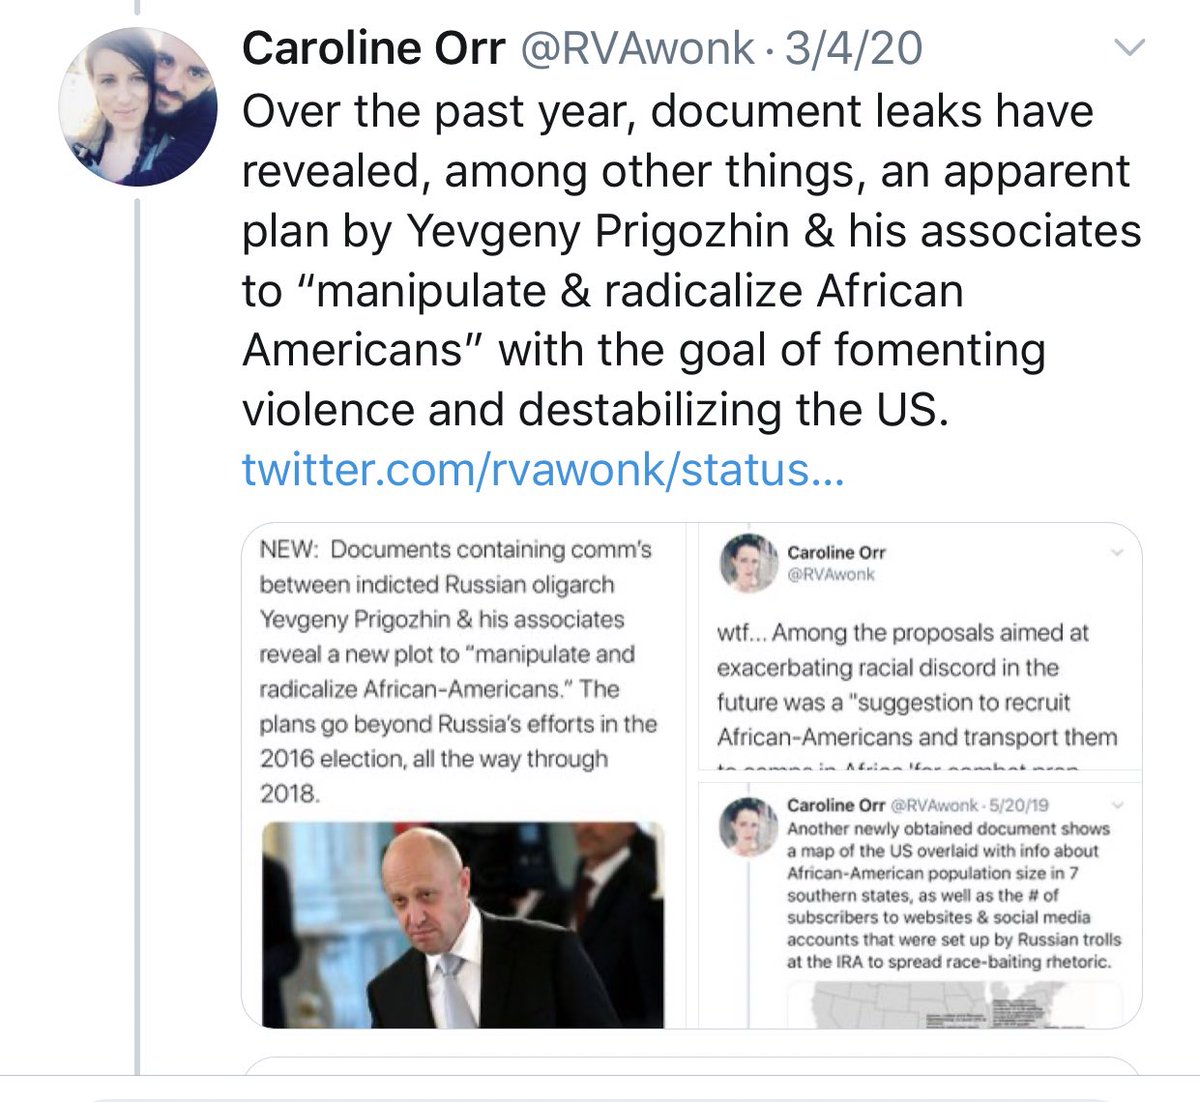 That testimony likely would have yielded crucial information with important implications for US elections, given that Prigozhin & his firms, including Wagner Group, have reportedly been planning actions to destabilize the US, too.